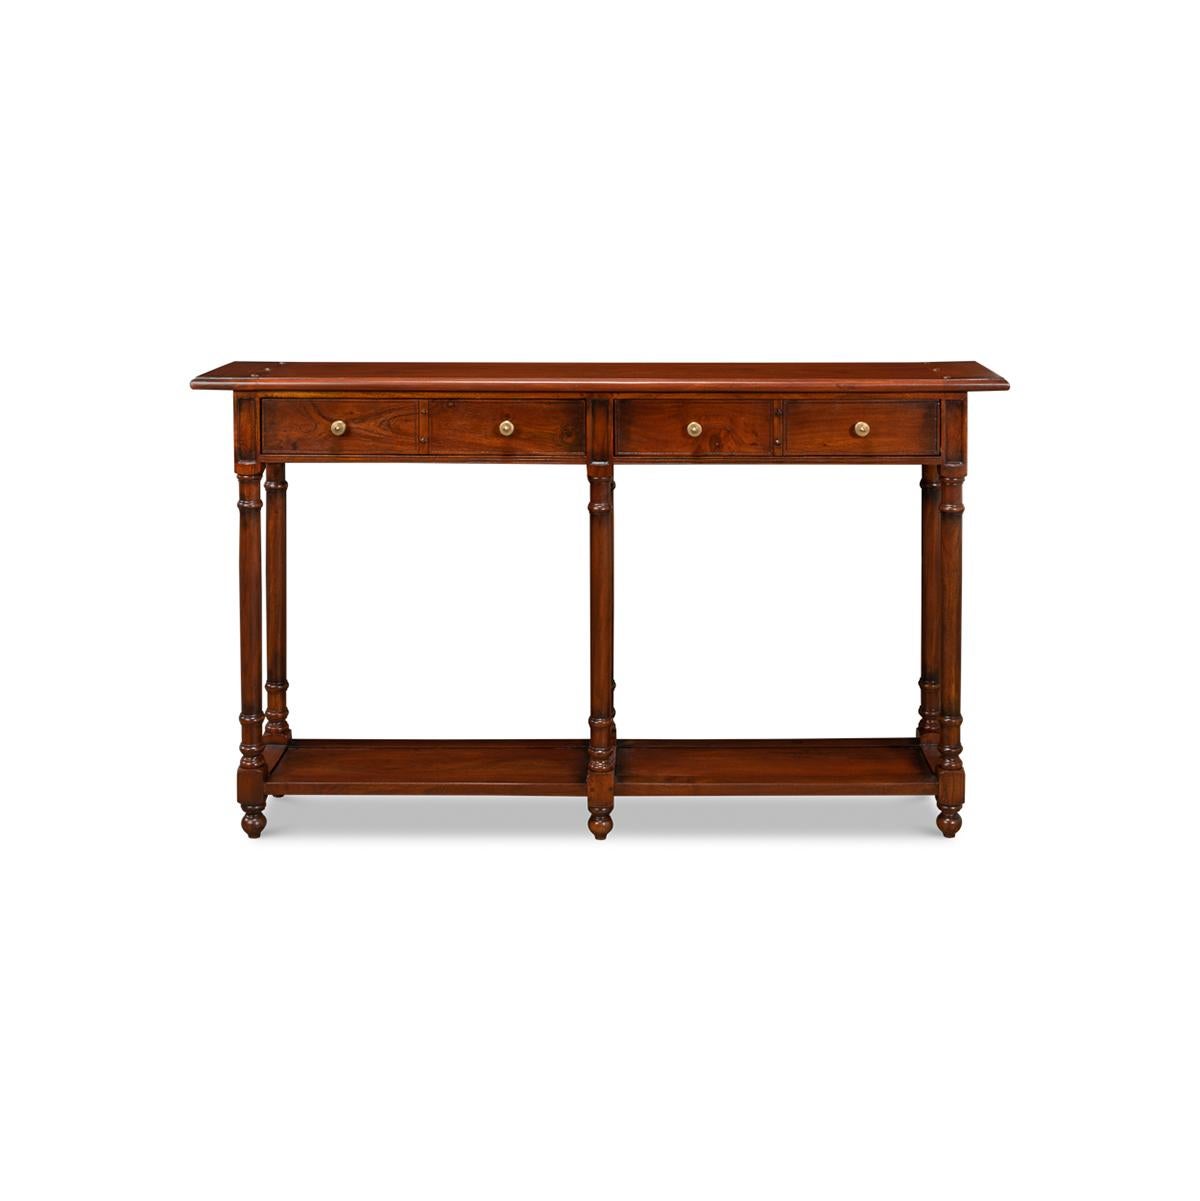 Provincial French directoire console table with traditional walnut stain finish, aged bronze knobs, a molded top edge, frieze drawers, turned legs and a lower shelf stretcher base.

Dimensions: 60